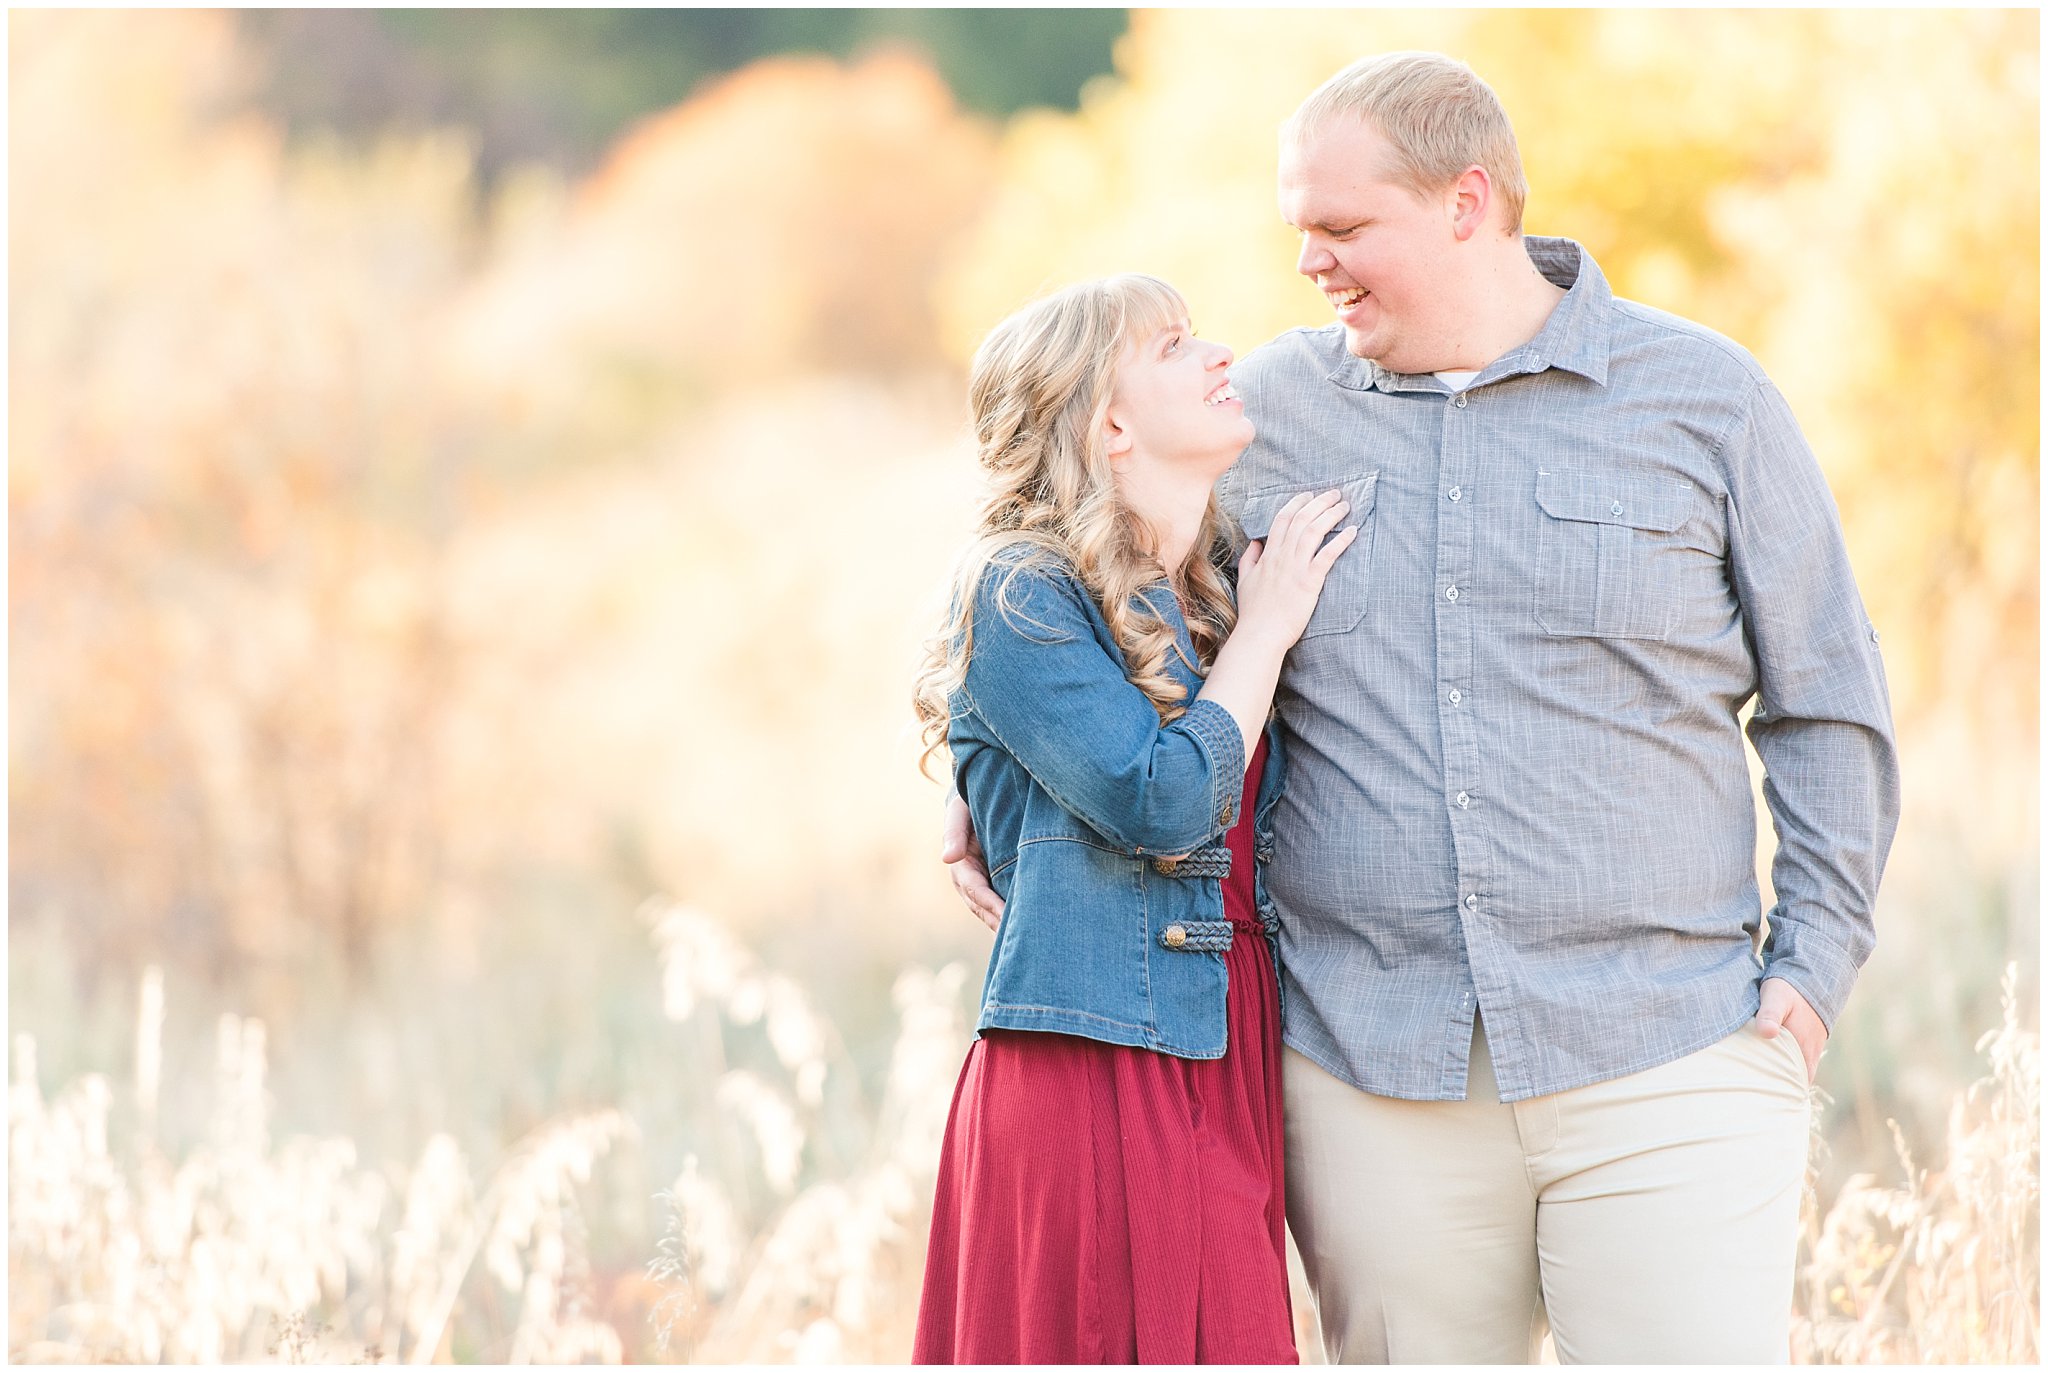 Couple dressed up with girl in burgundy dress with jean jacket and guy in grey shirt and light colored pants | Trapper's Loop Fall Engagement Session | Snowbasin Utah Mountains | Jessie and Dallin Photography